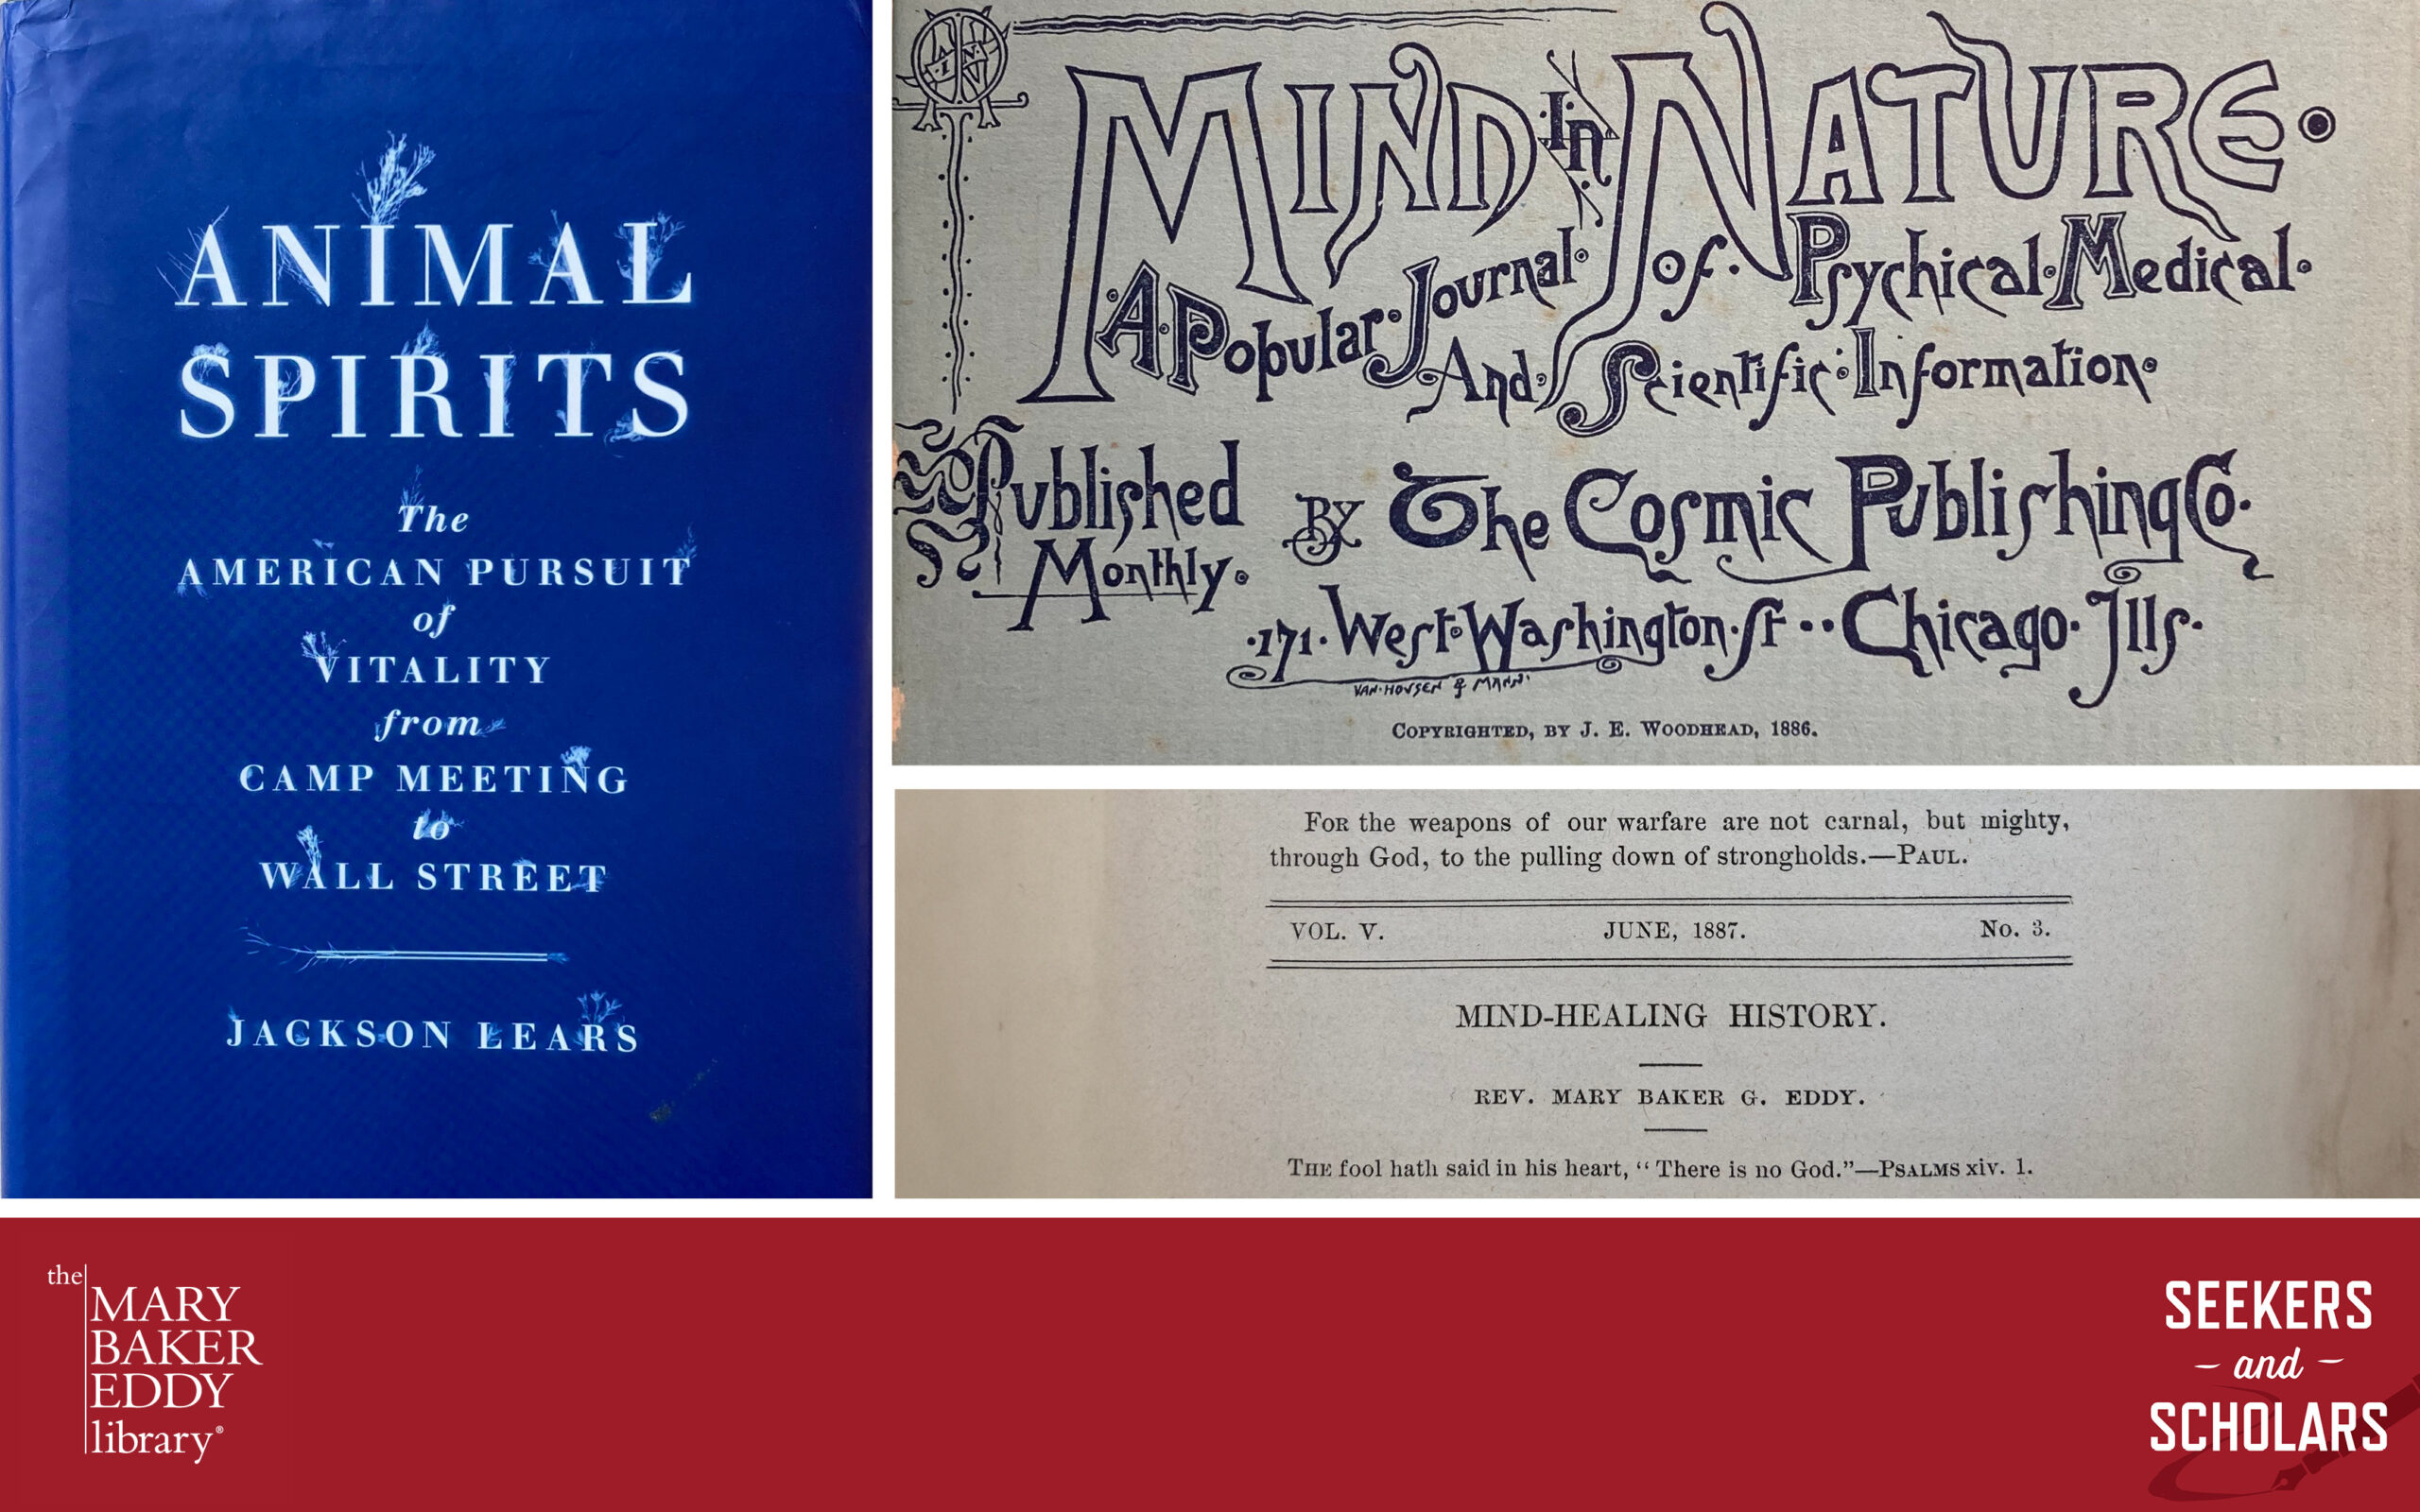 Collage photos: Book cover of "Animal Spirits: the American Pursuit of Vitality from Camp Meeting to Wall Street" by Jackson Lears; front cover of "Mind in Nature: A Popular Journal of Psychical Medical and Scientific Information;" and the article “MIND-HEALING HISTORY” by Mary Baker Eddy, in The Christian Science Journal, June 1887.